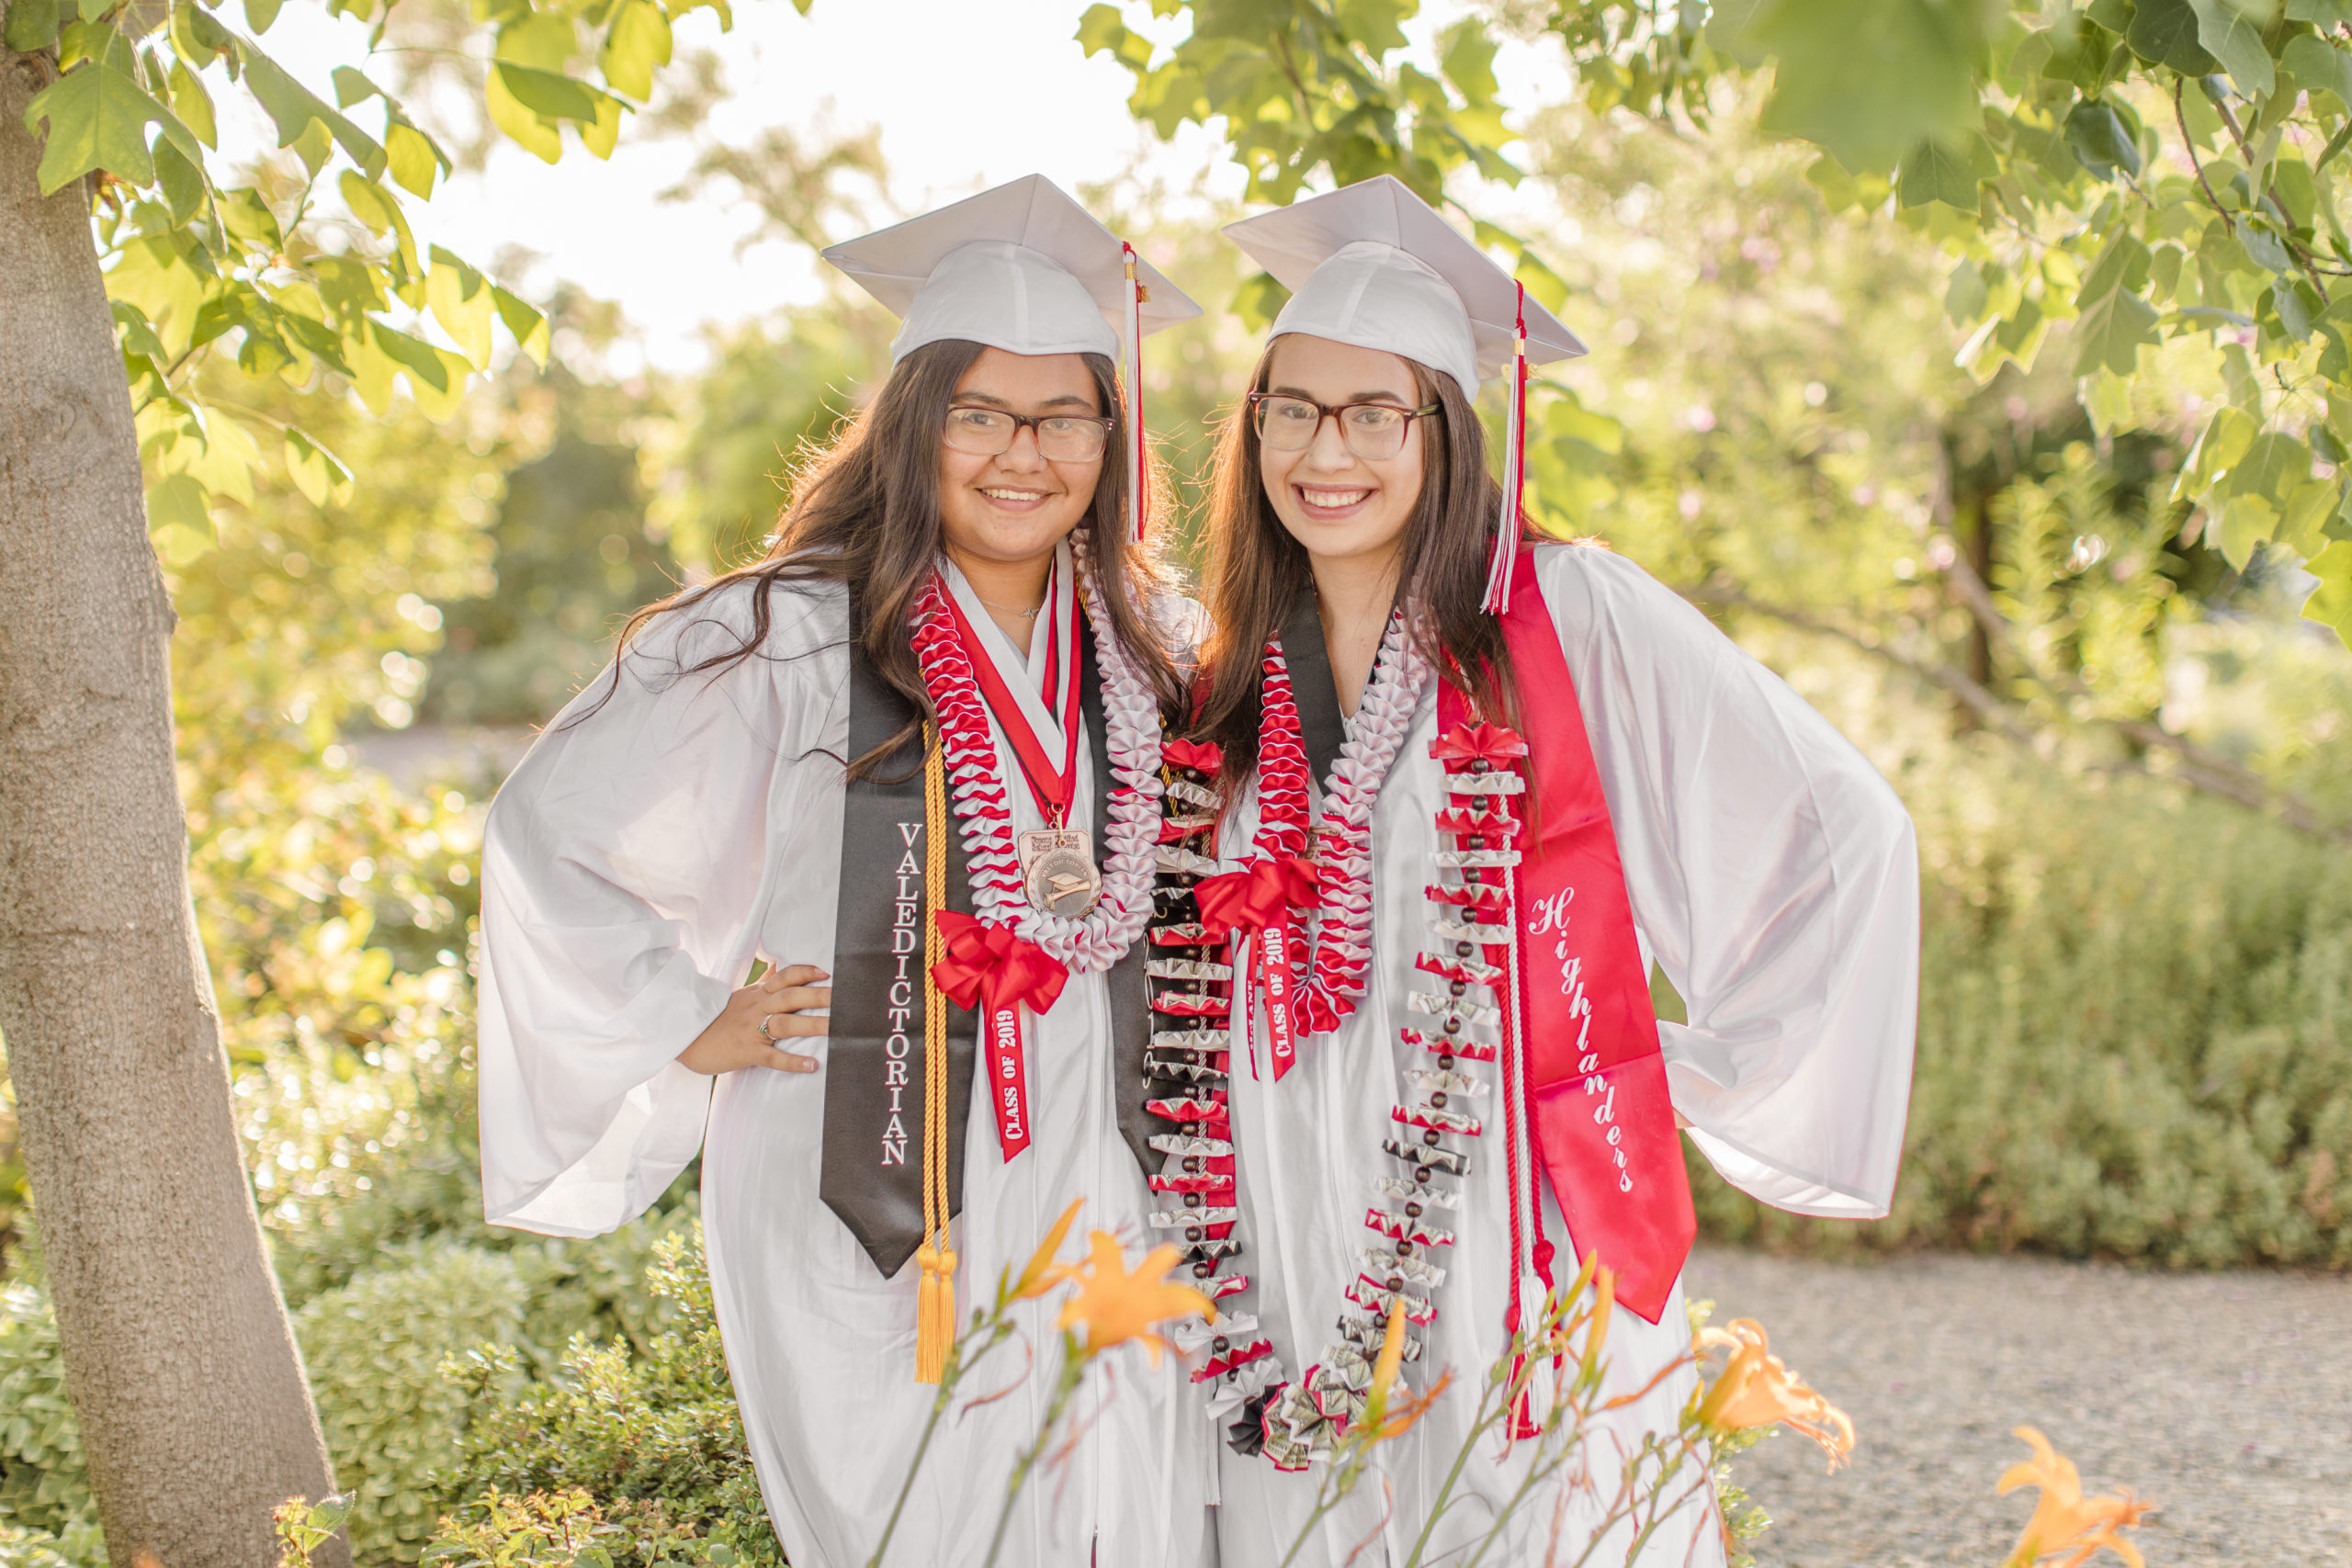 Senior girls in cap and gown